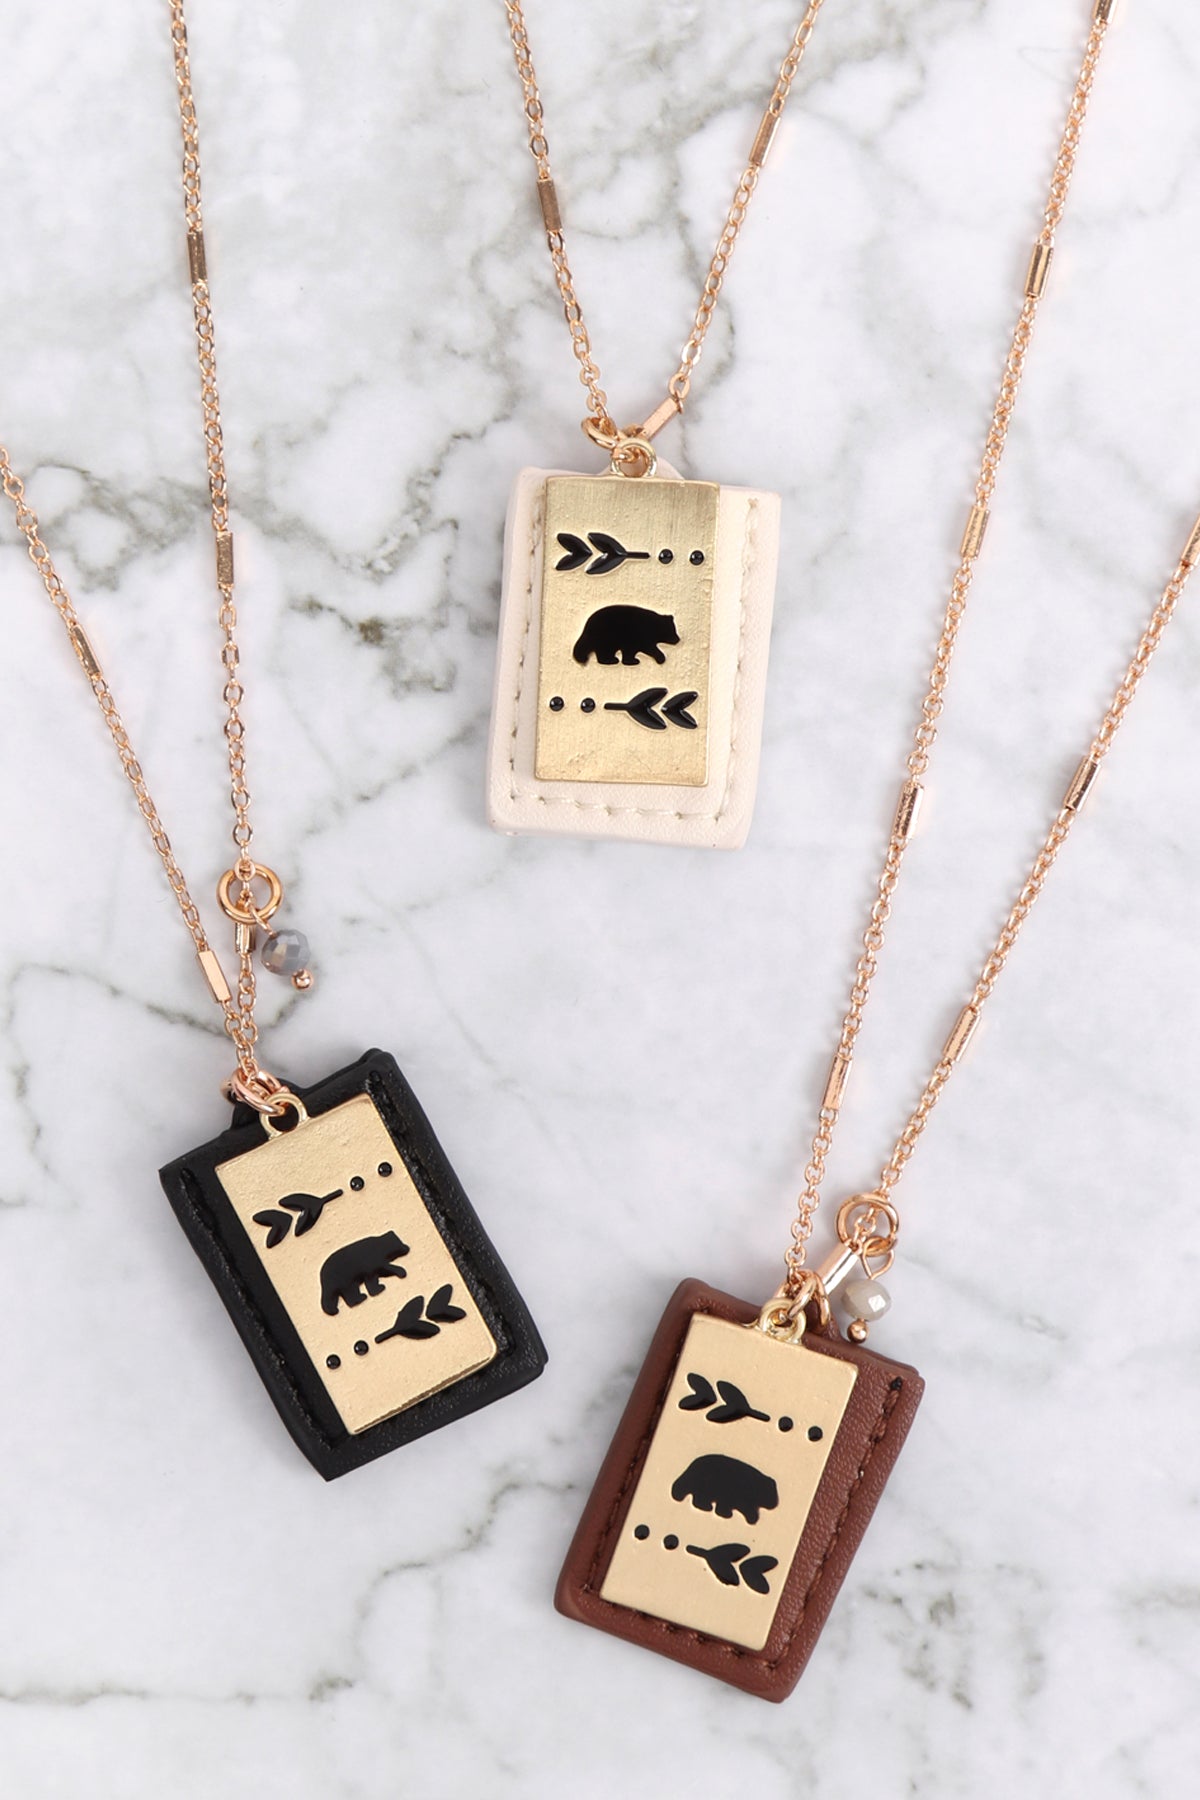 BEAR ENGRAVED PLATE POCKET NECKLACE  (NOW $1.00 ONLY!)